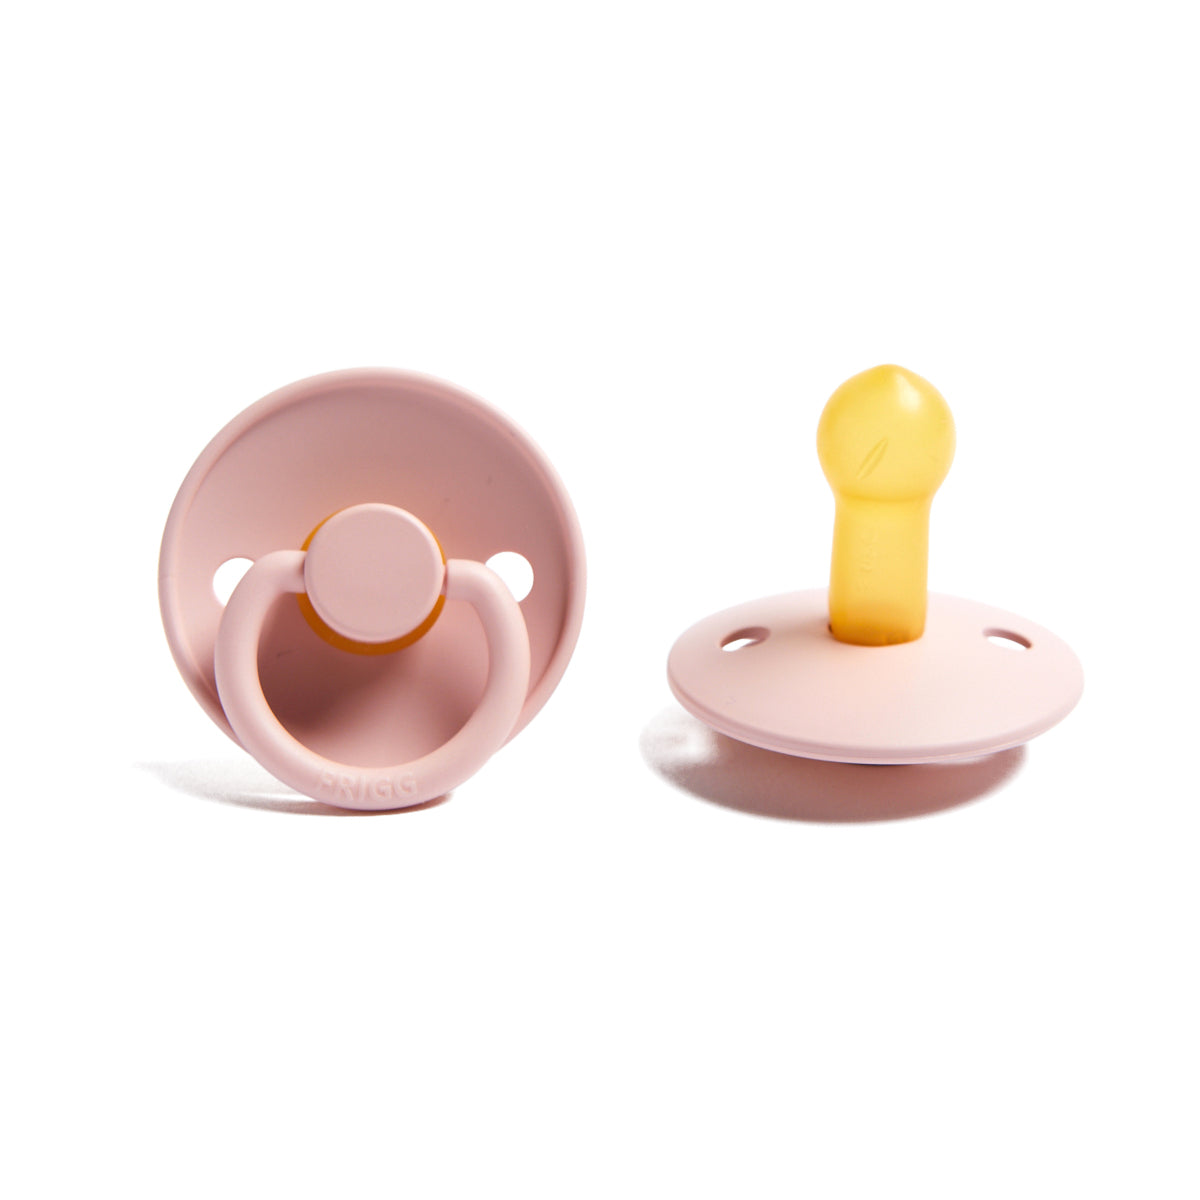 FRIGG Dummy with Air Holes in Pink Accessories  from Pepa London